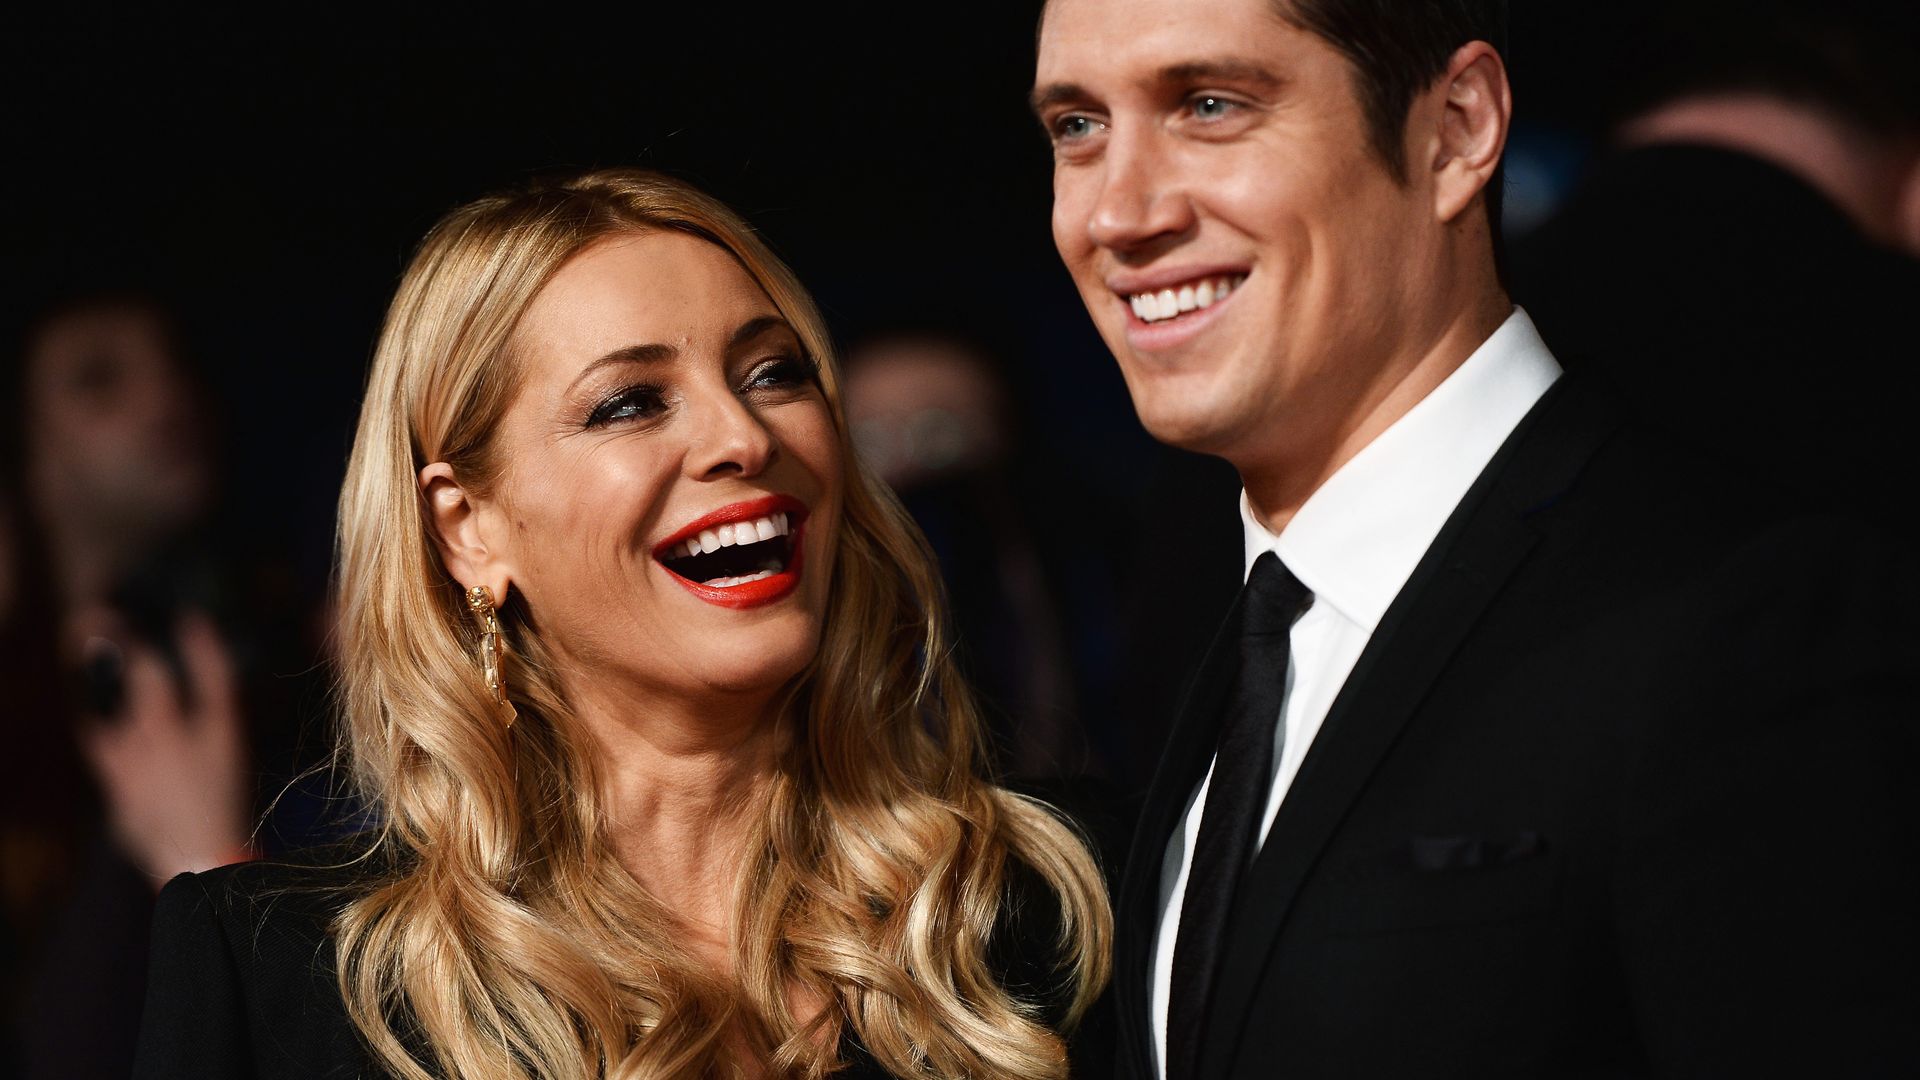 Vernon Kay celebrates major achievement – and wife Tess Daly has the sweetest reaction